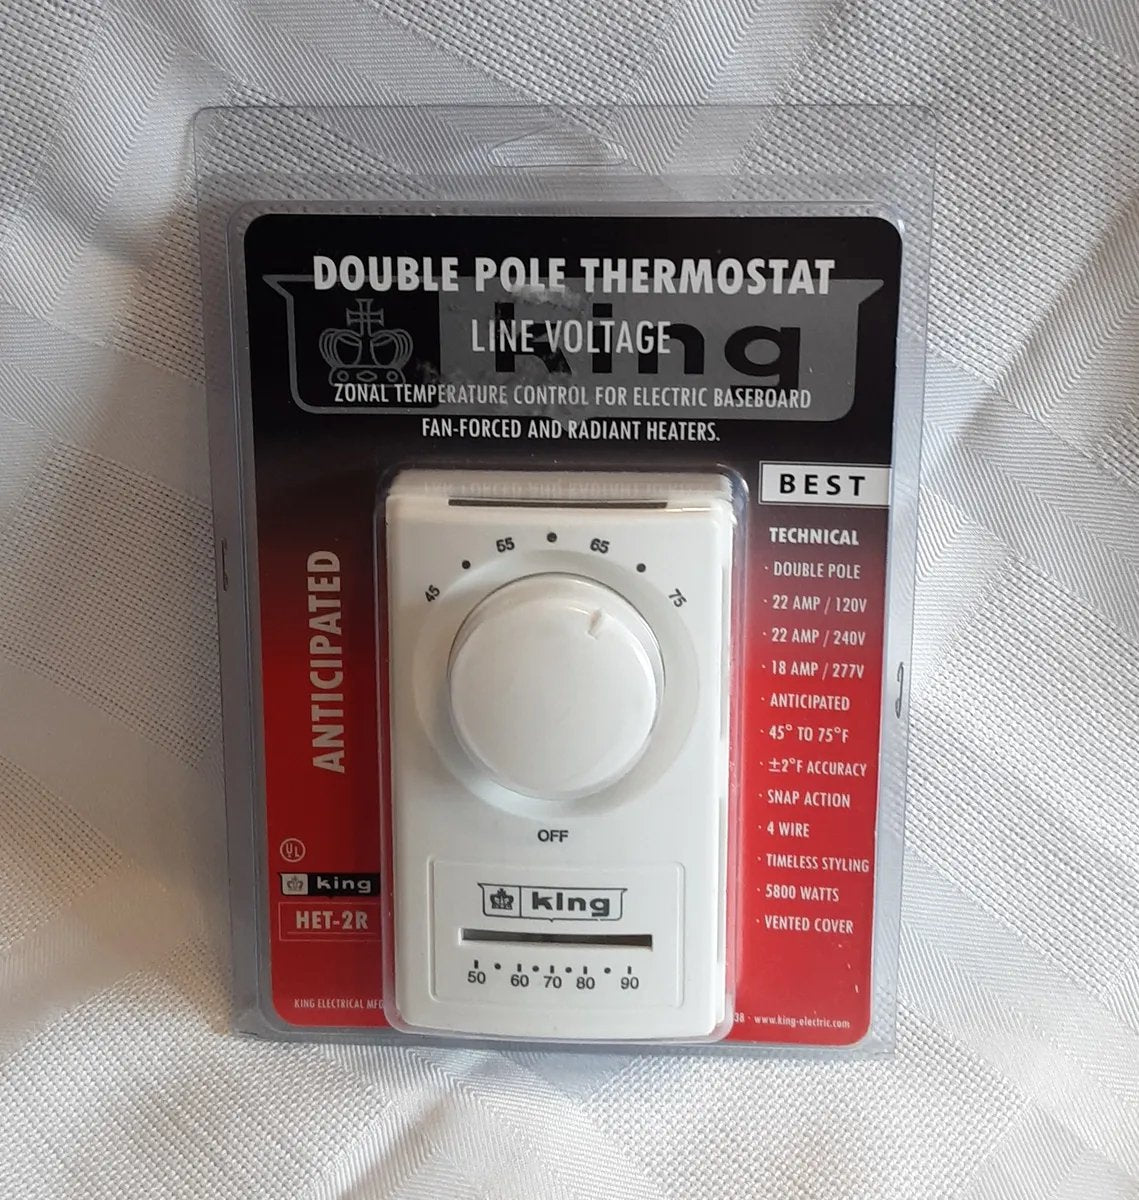 King HET-2R Double Pole Thermostat